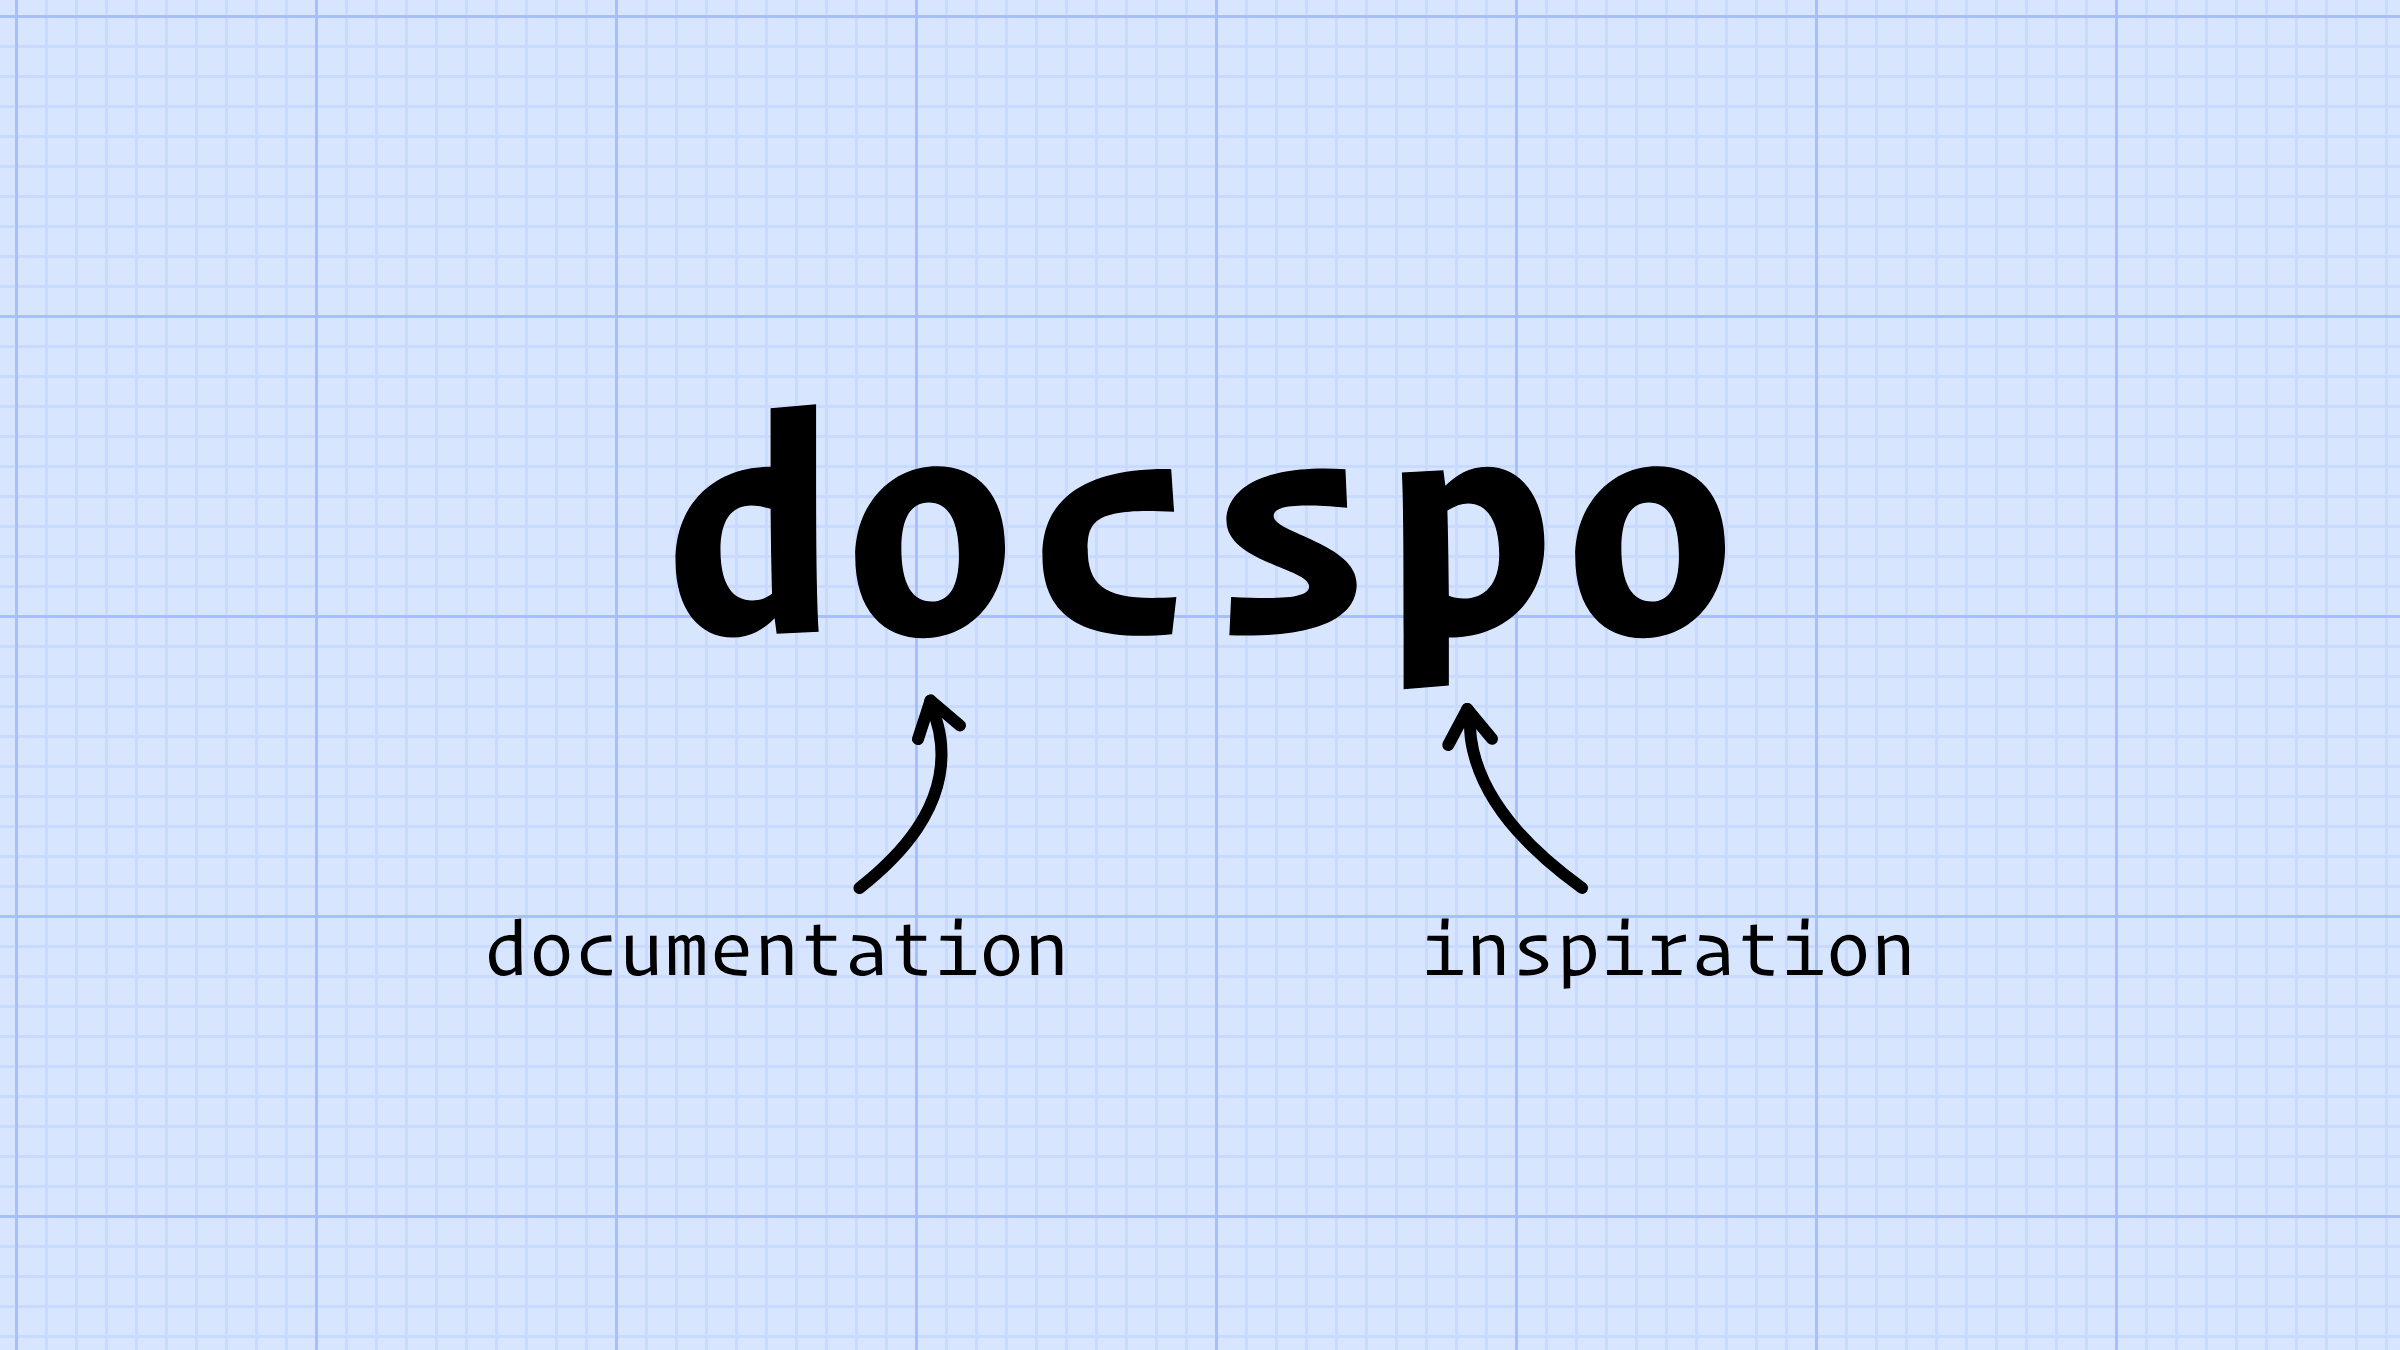 docspo written in large lettering. Below, the word documentation is to the left with an arrow pointing to the first half of the word (doc), and the word inspiration is to the right with an arrow pointing to the second half of the word (spo).